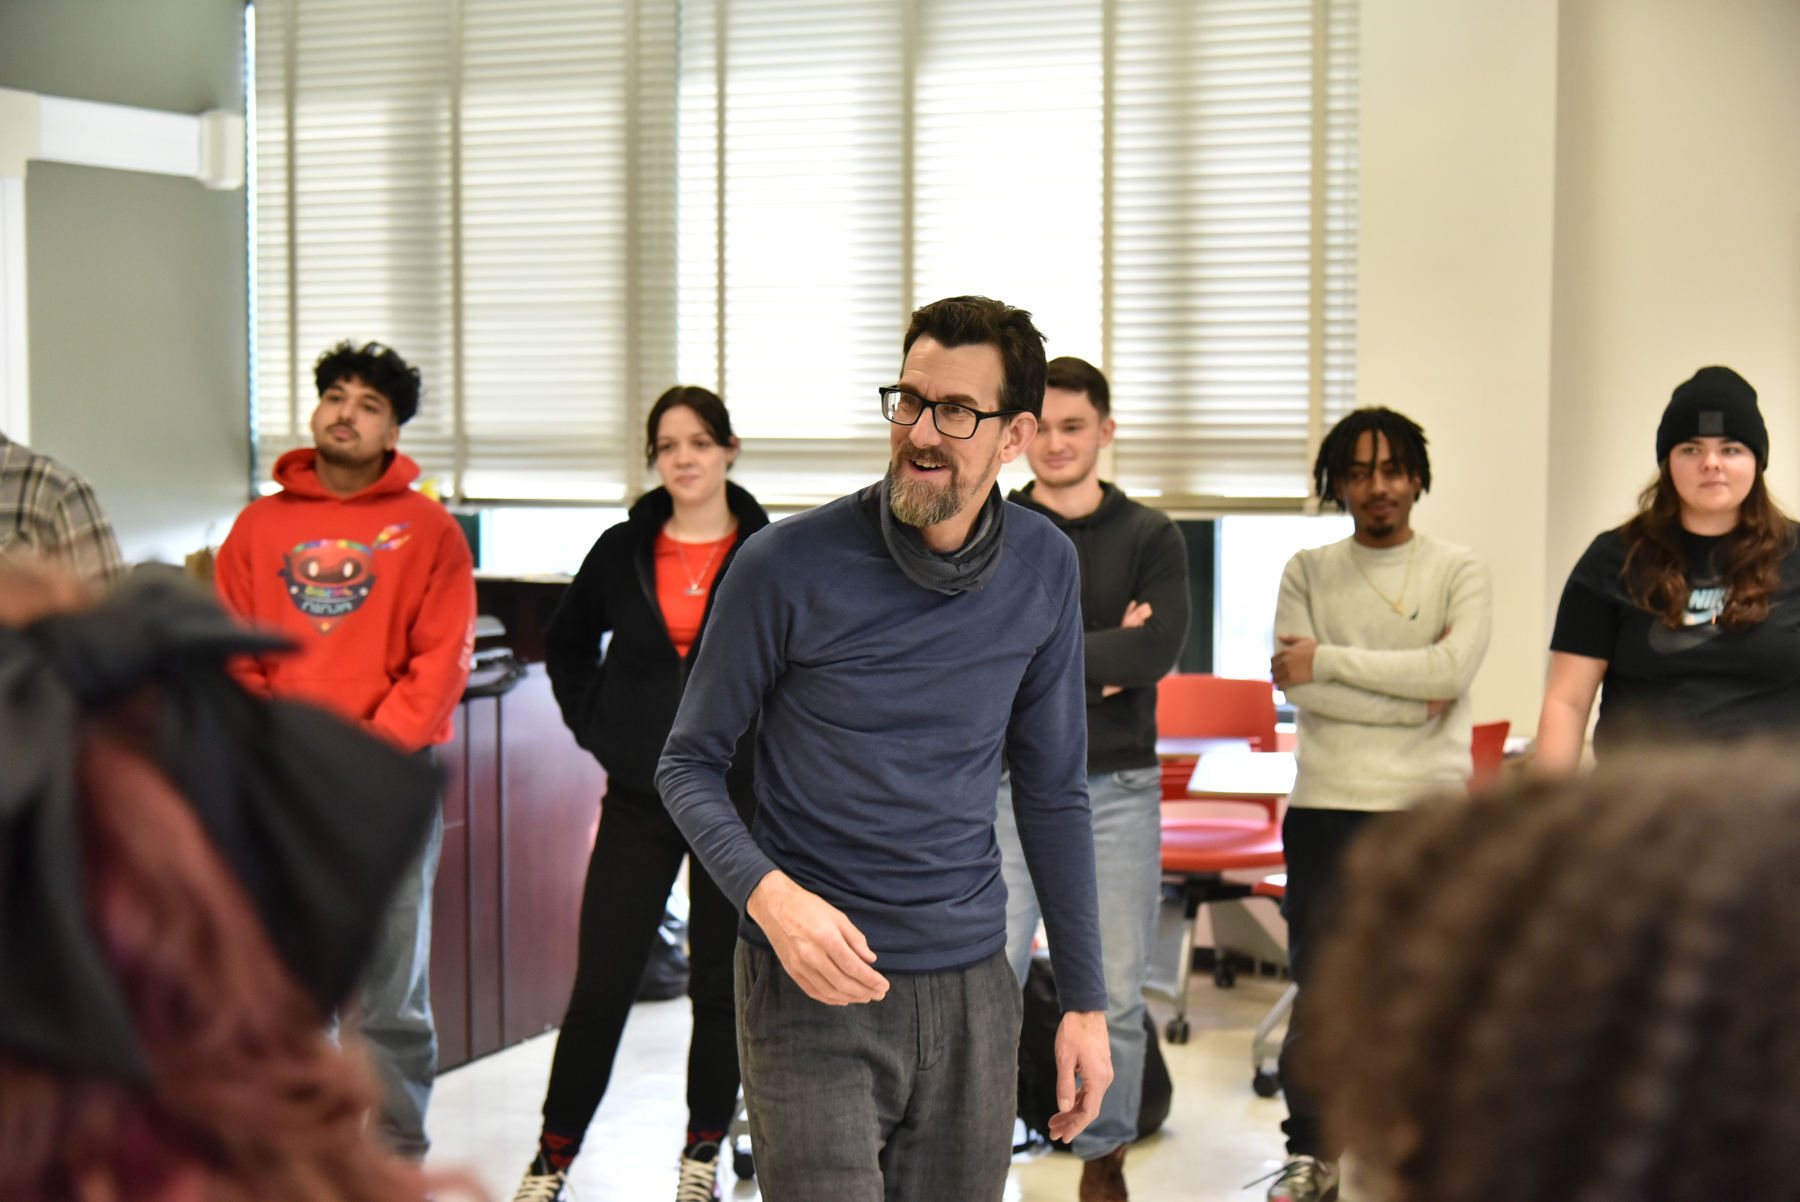 During the Actors From The London Stage’s visit to SUNY Oswego, classes they connected with included Michael Wagg (pictured) working Feb.13 with students in Lyn Blanchfield’s history class in Mahar Hall.